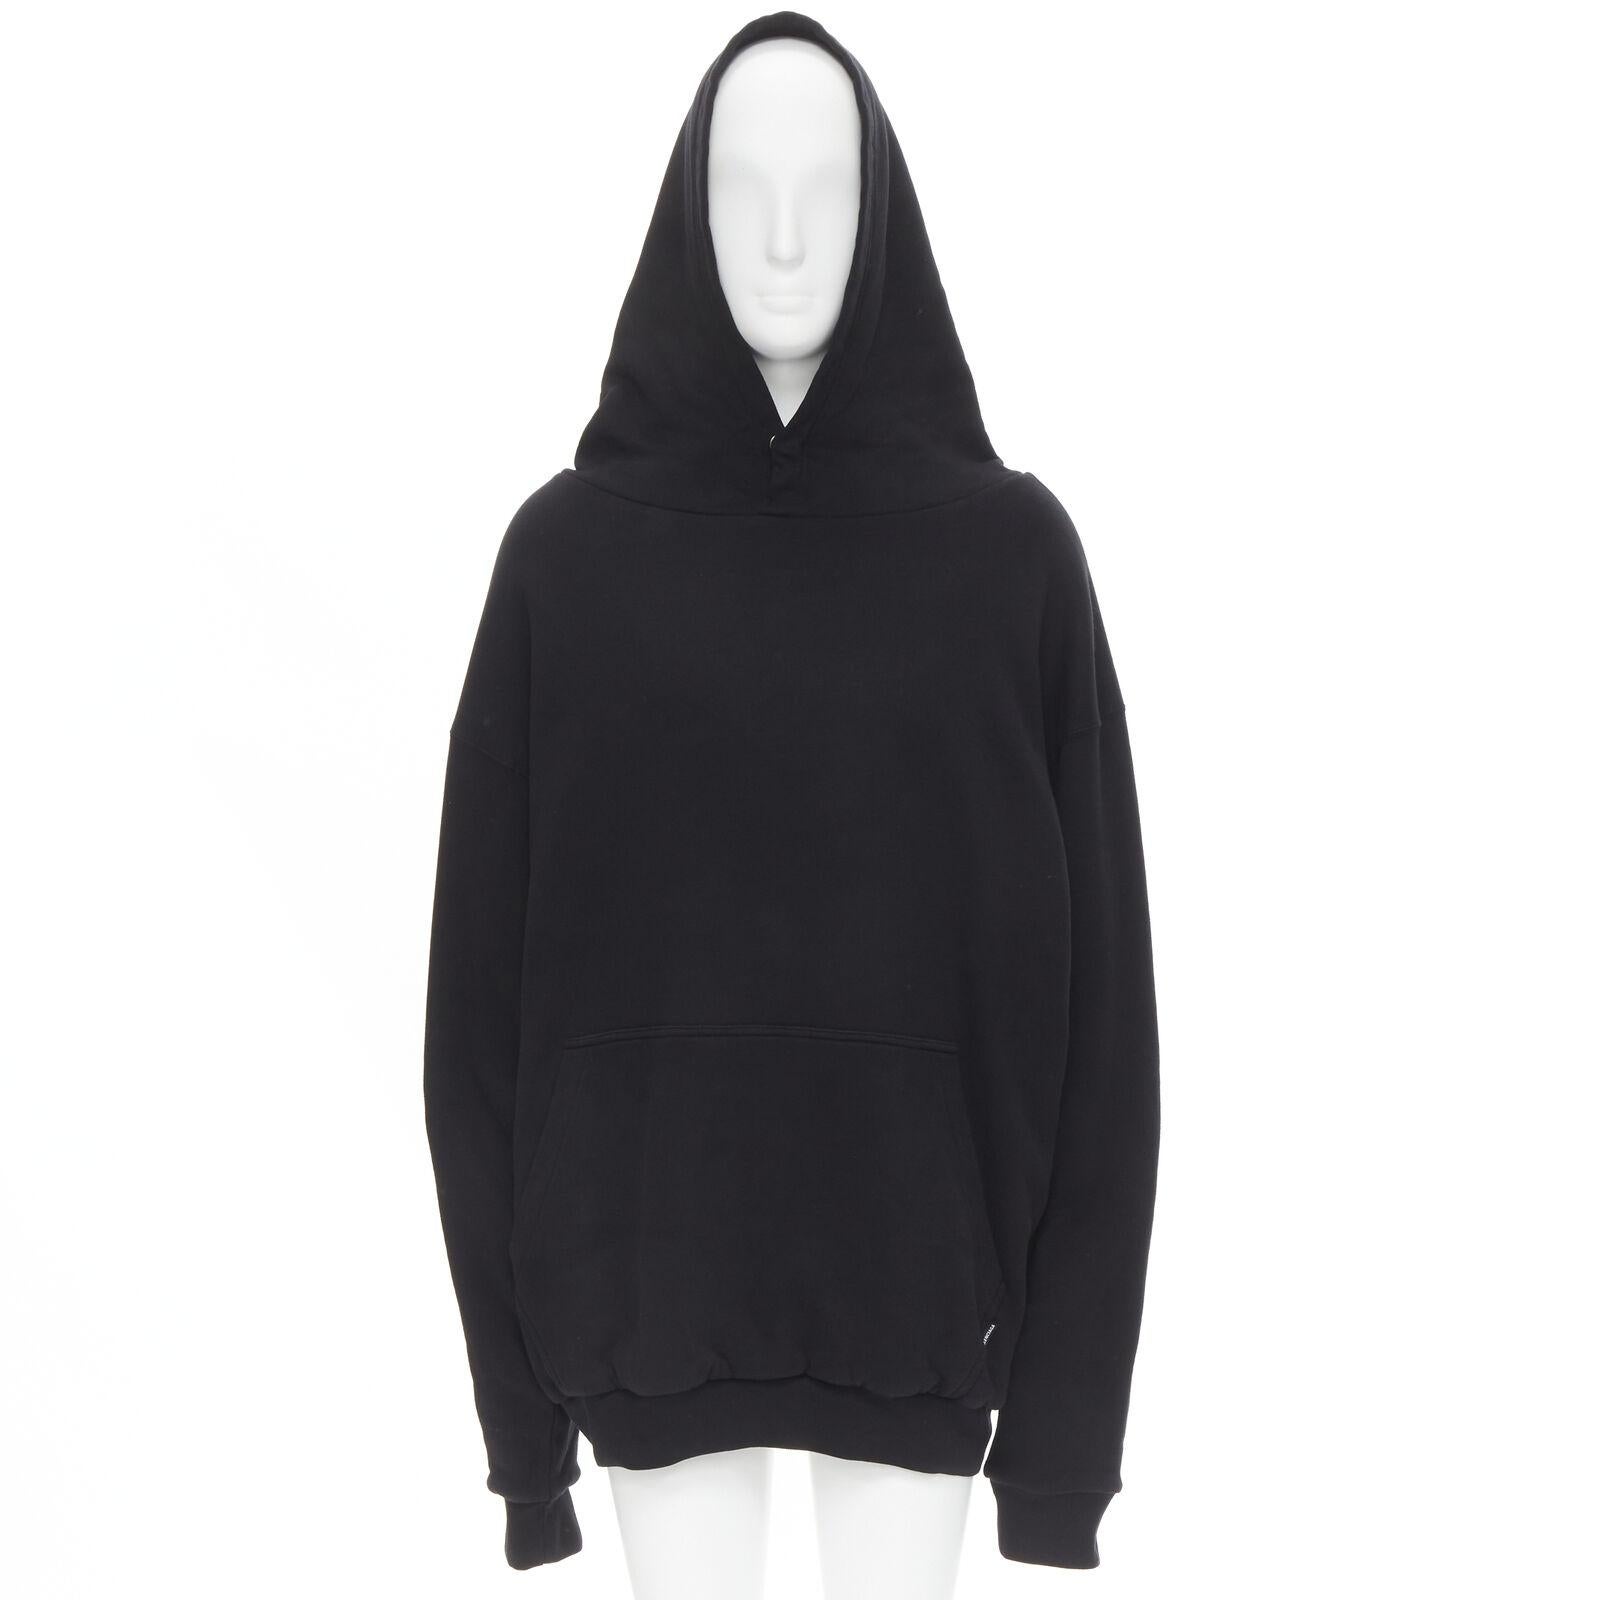 new BALENCIAGA Demna 2018 black I Love Techno embroidered oversized hoodie M
Reference: TGAS/C00470
Brand: Balenciaga
Designer: Demna
Model: 556130 TDV49 1000
Collection: 2018
Material: Cotton
Color: Black
Pattern: Solid
Closure: Snap